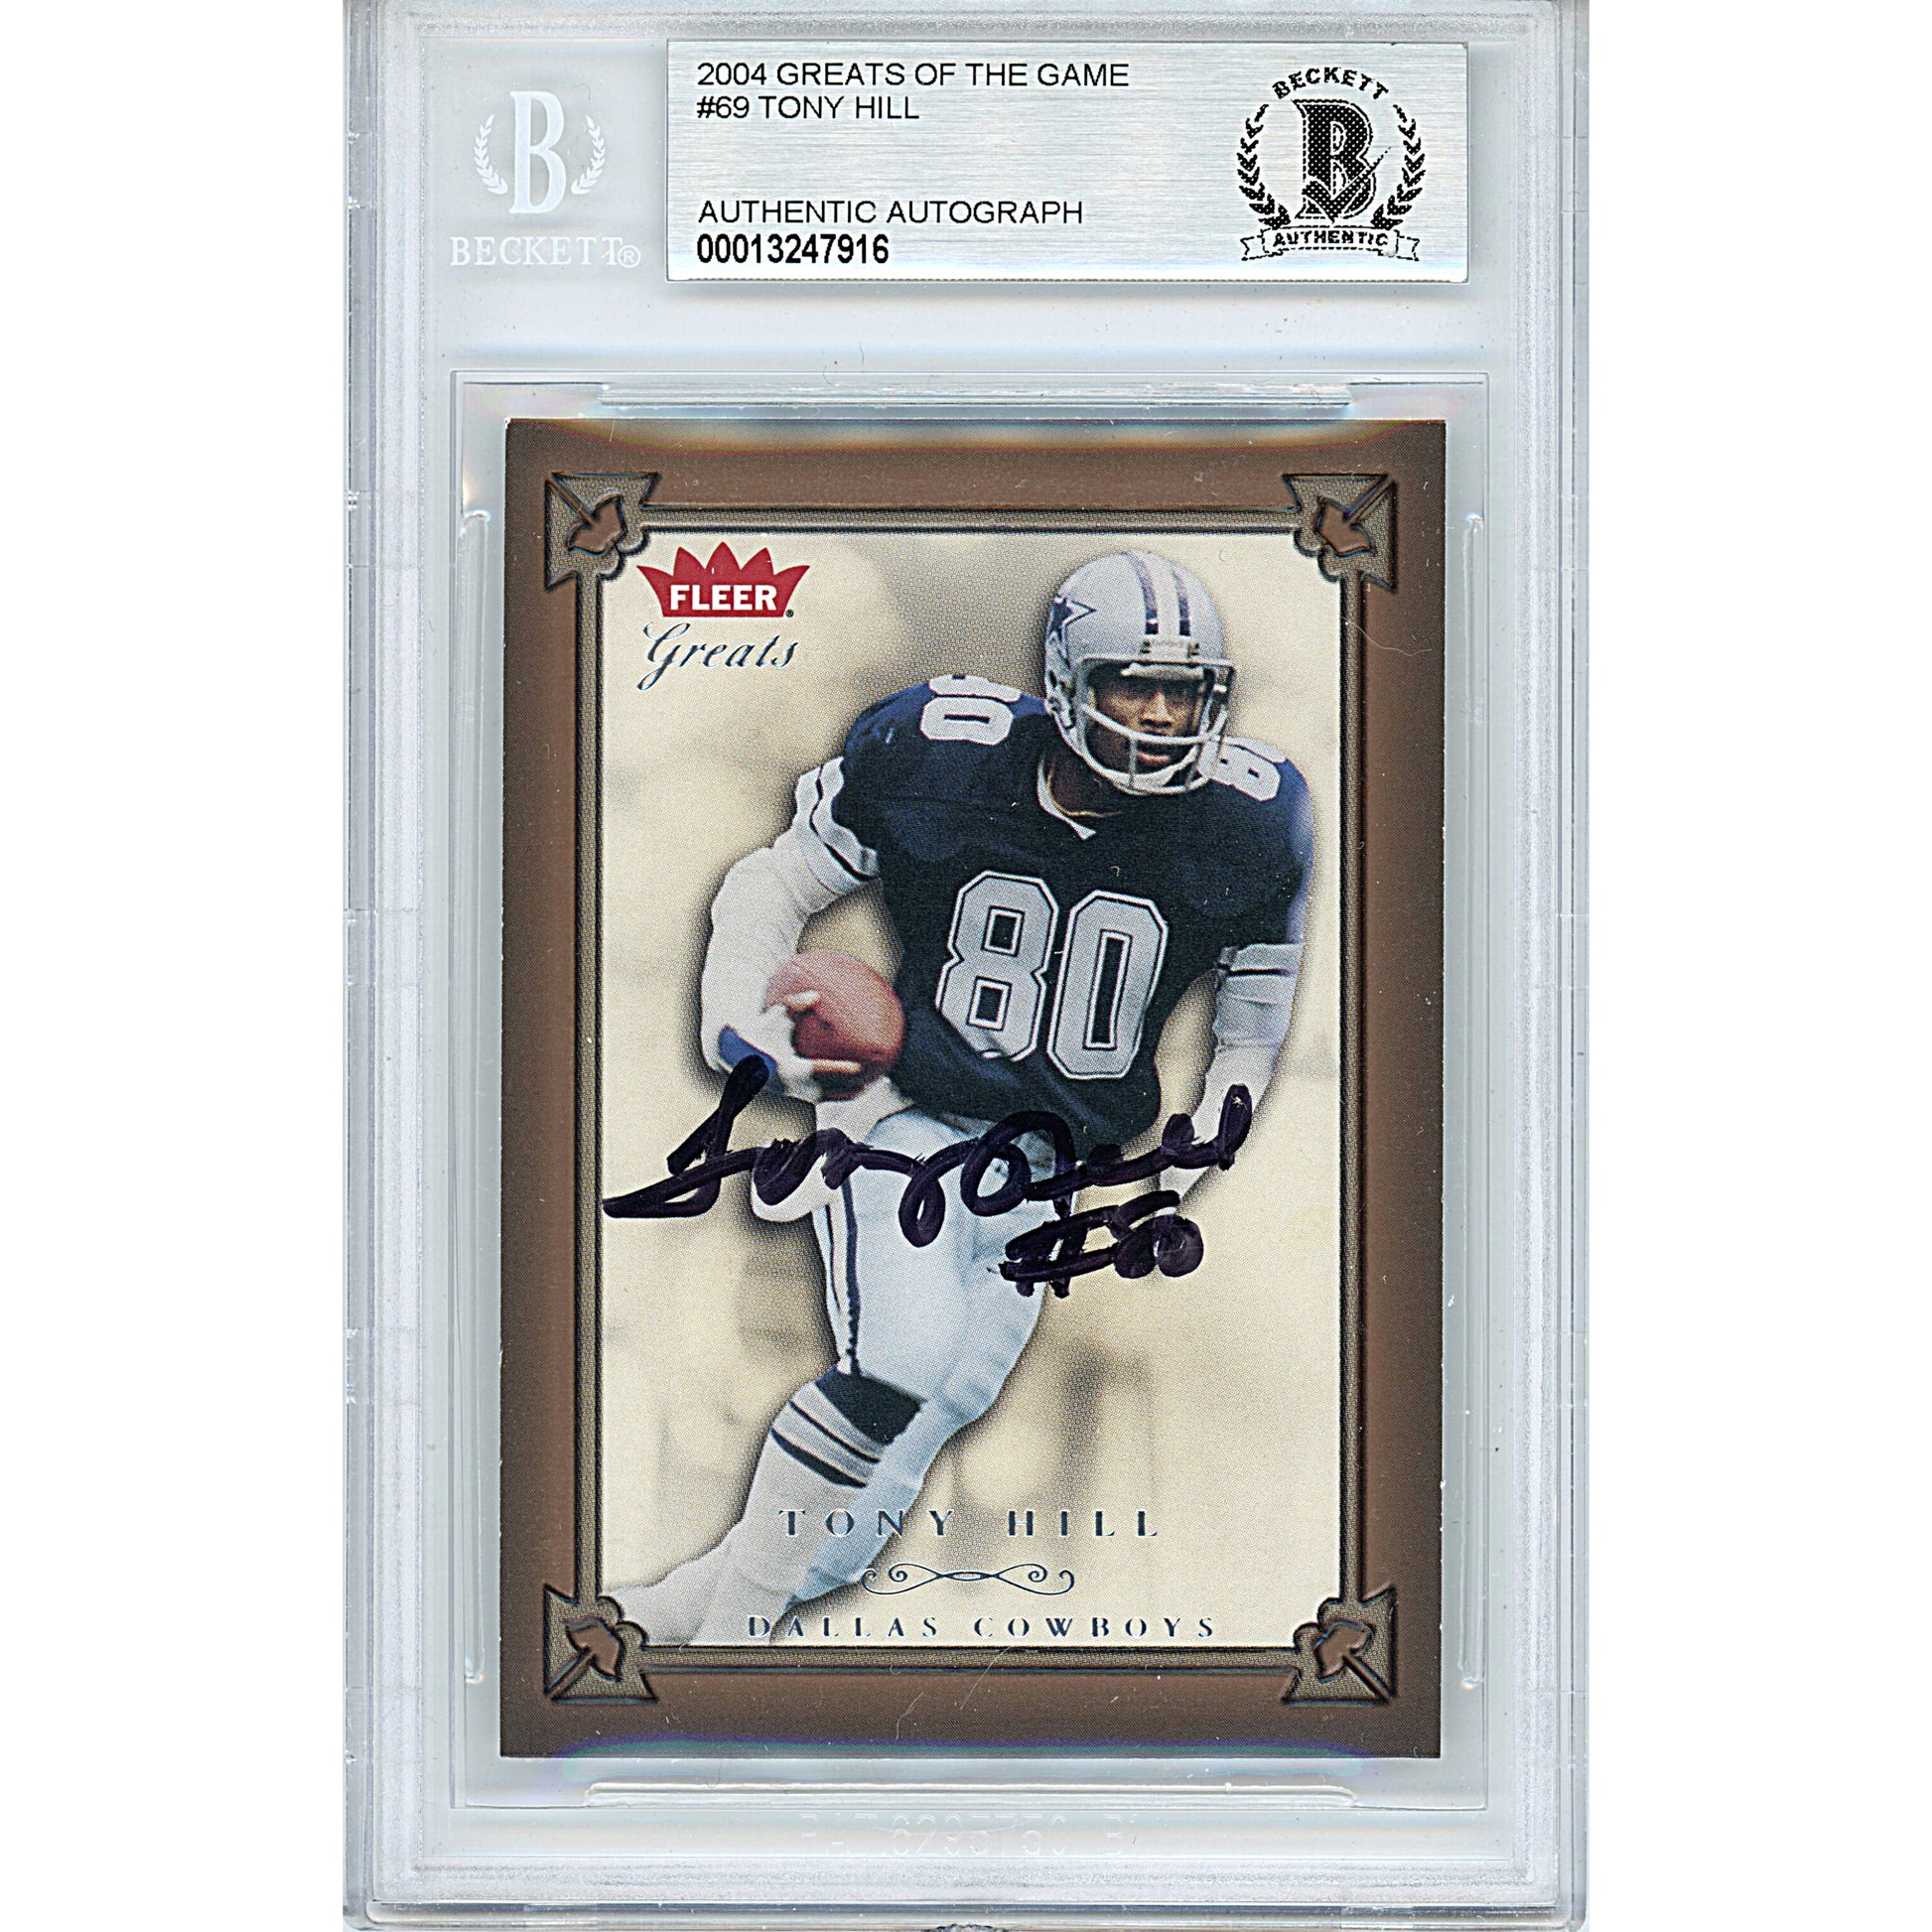 Footballs- Autographed- Tony Hill Signed Dallas Cowboys 2004 Fleer Greats of the Game Football Card Beckett BAS Authenticated Slabbed 00013247916 - 101